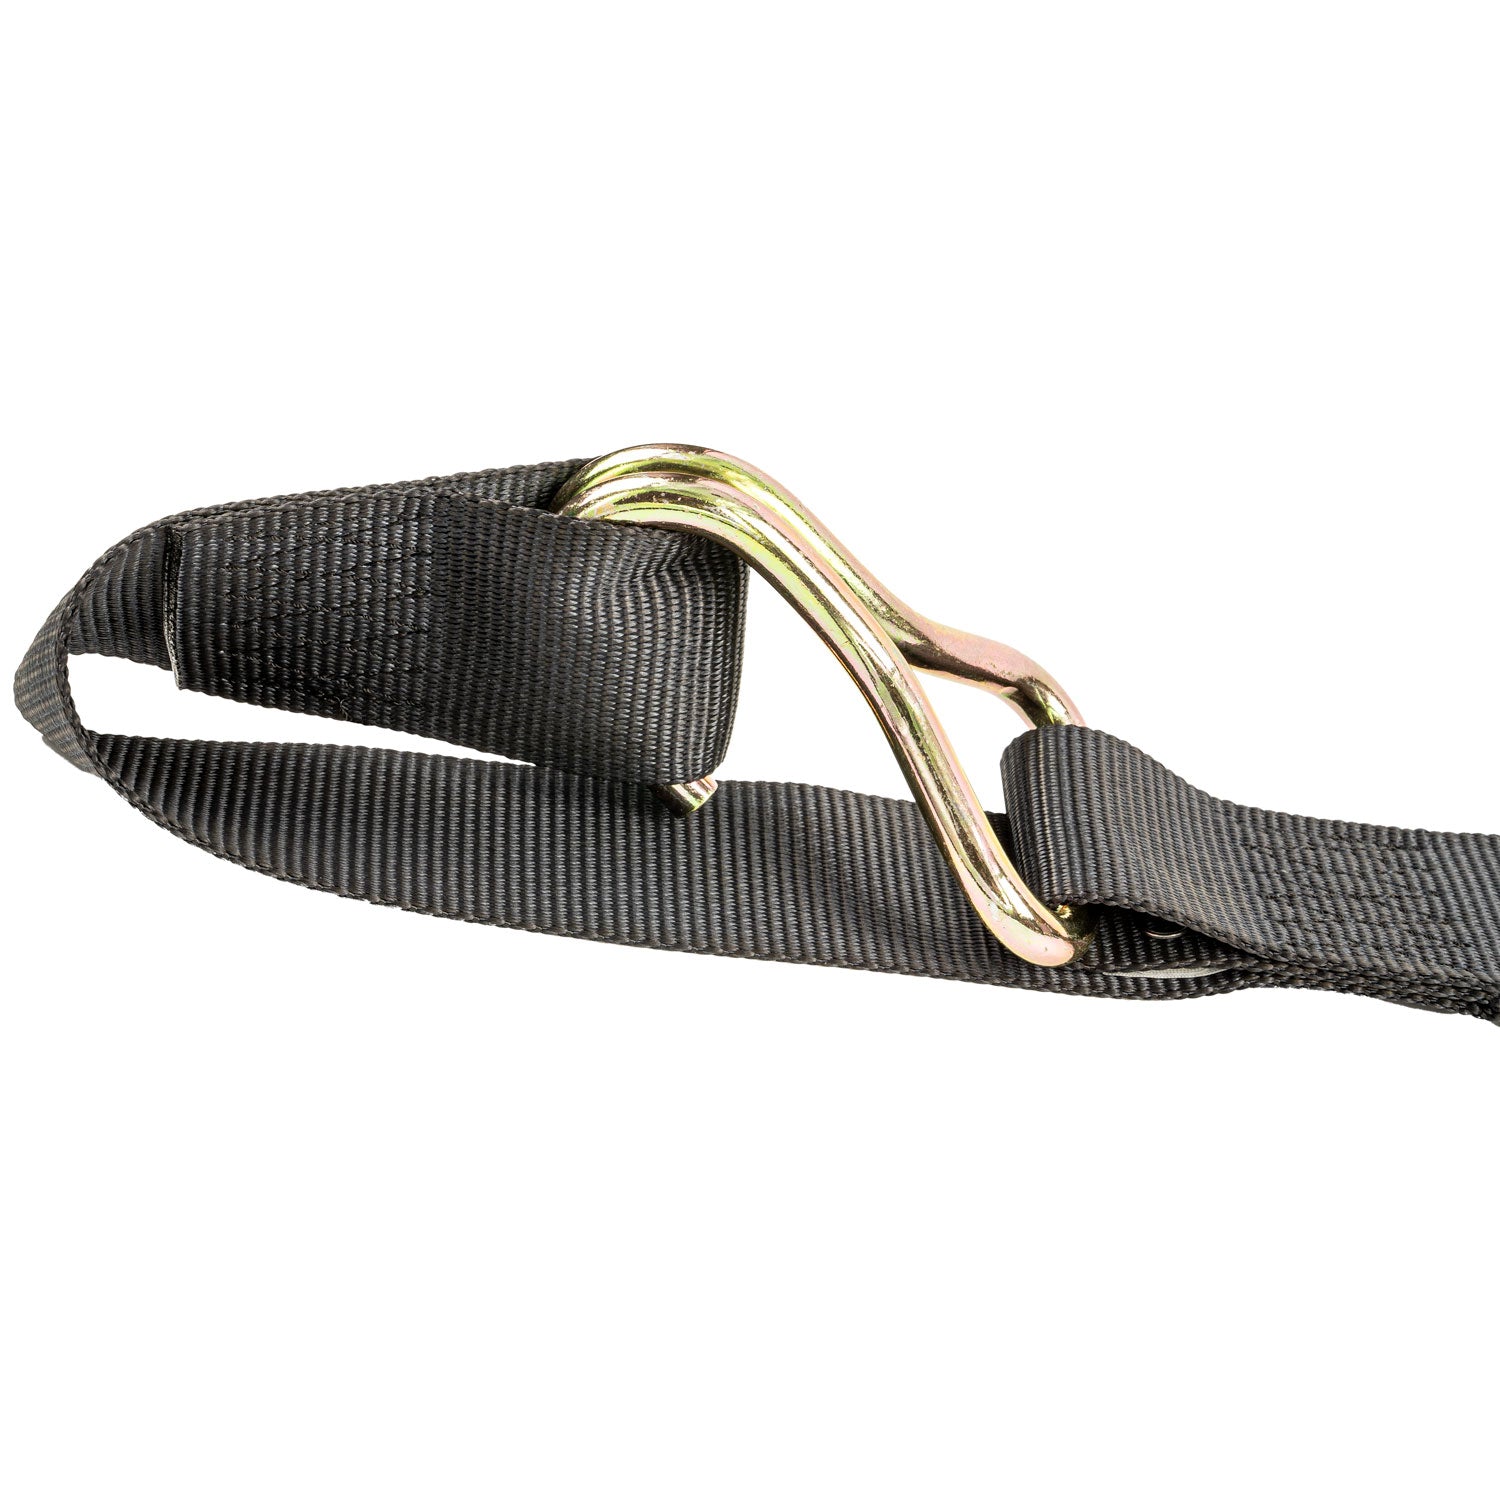 9ft x 2in ANCHOR STRAPS Ratchet Strap: 2000lb WLL, 6,000lb Break Strength - The Perfect Bungee & ShockStrap Tie Downs